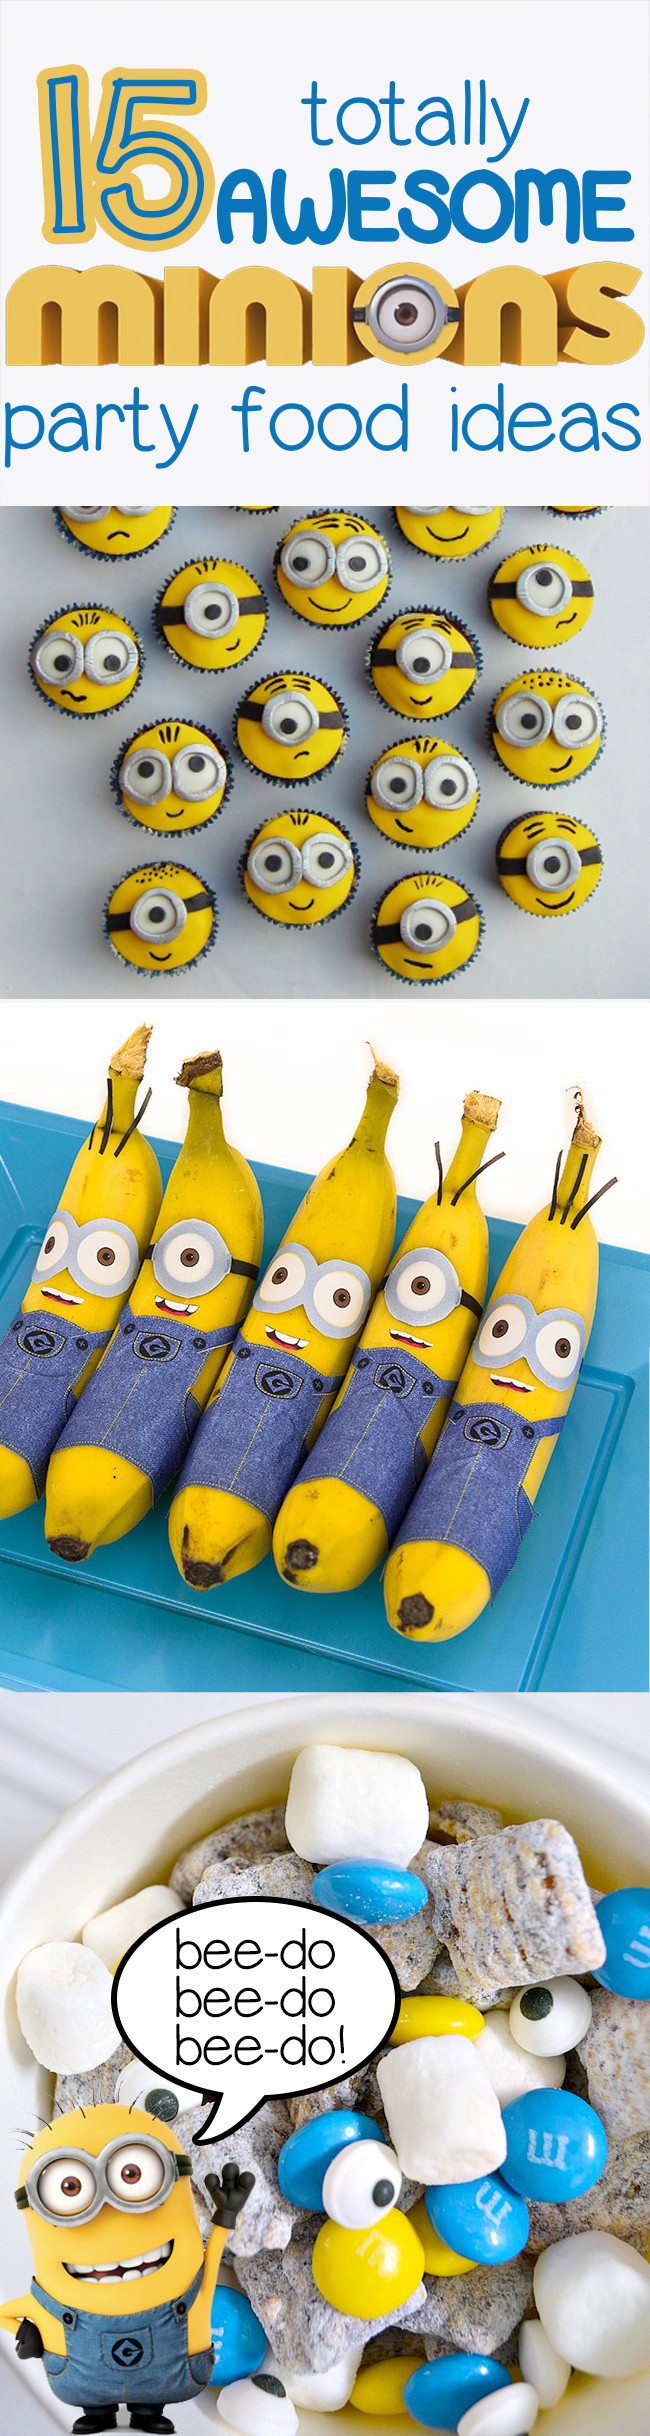 Minion Food Party Ideas
 15 Totally Awesome Minions Party Food Ideas